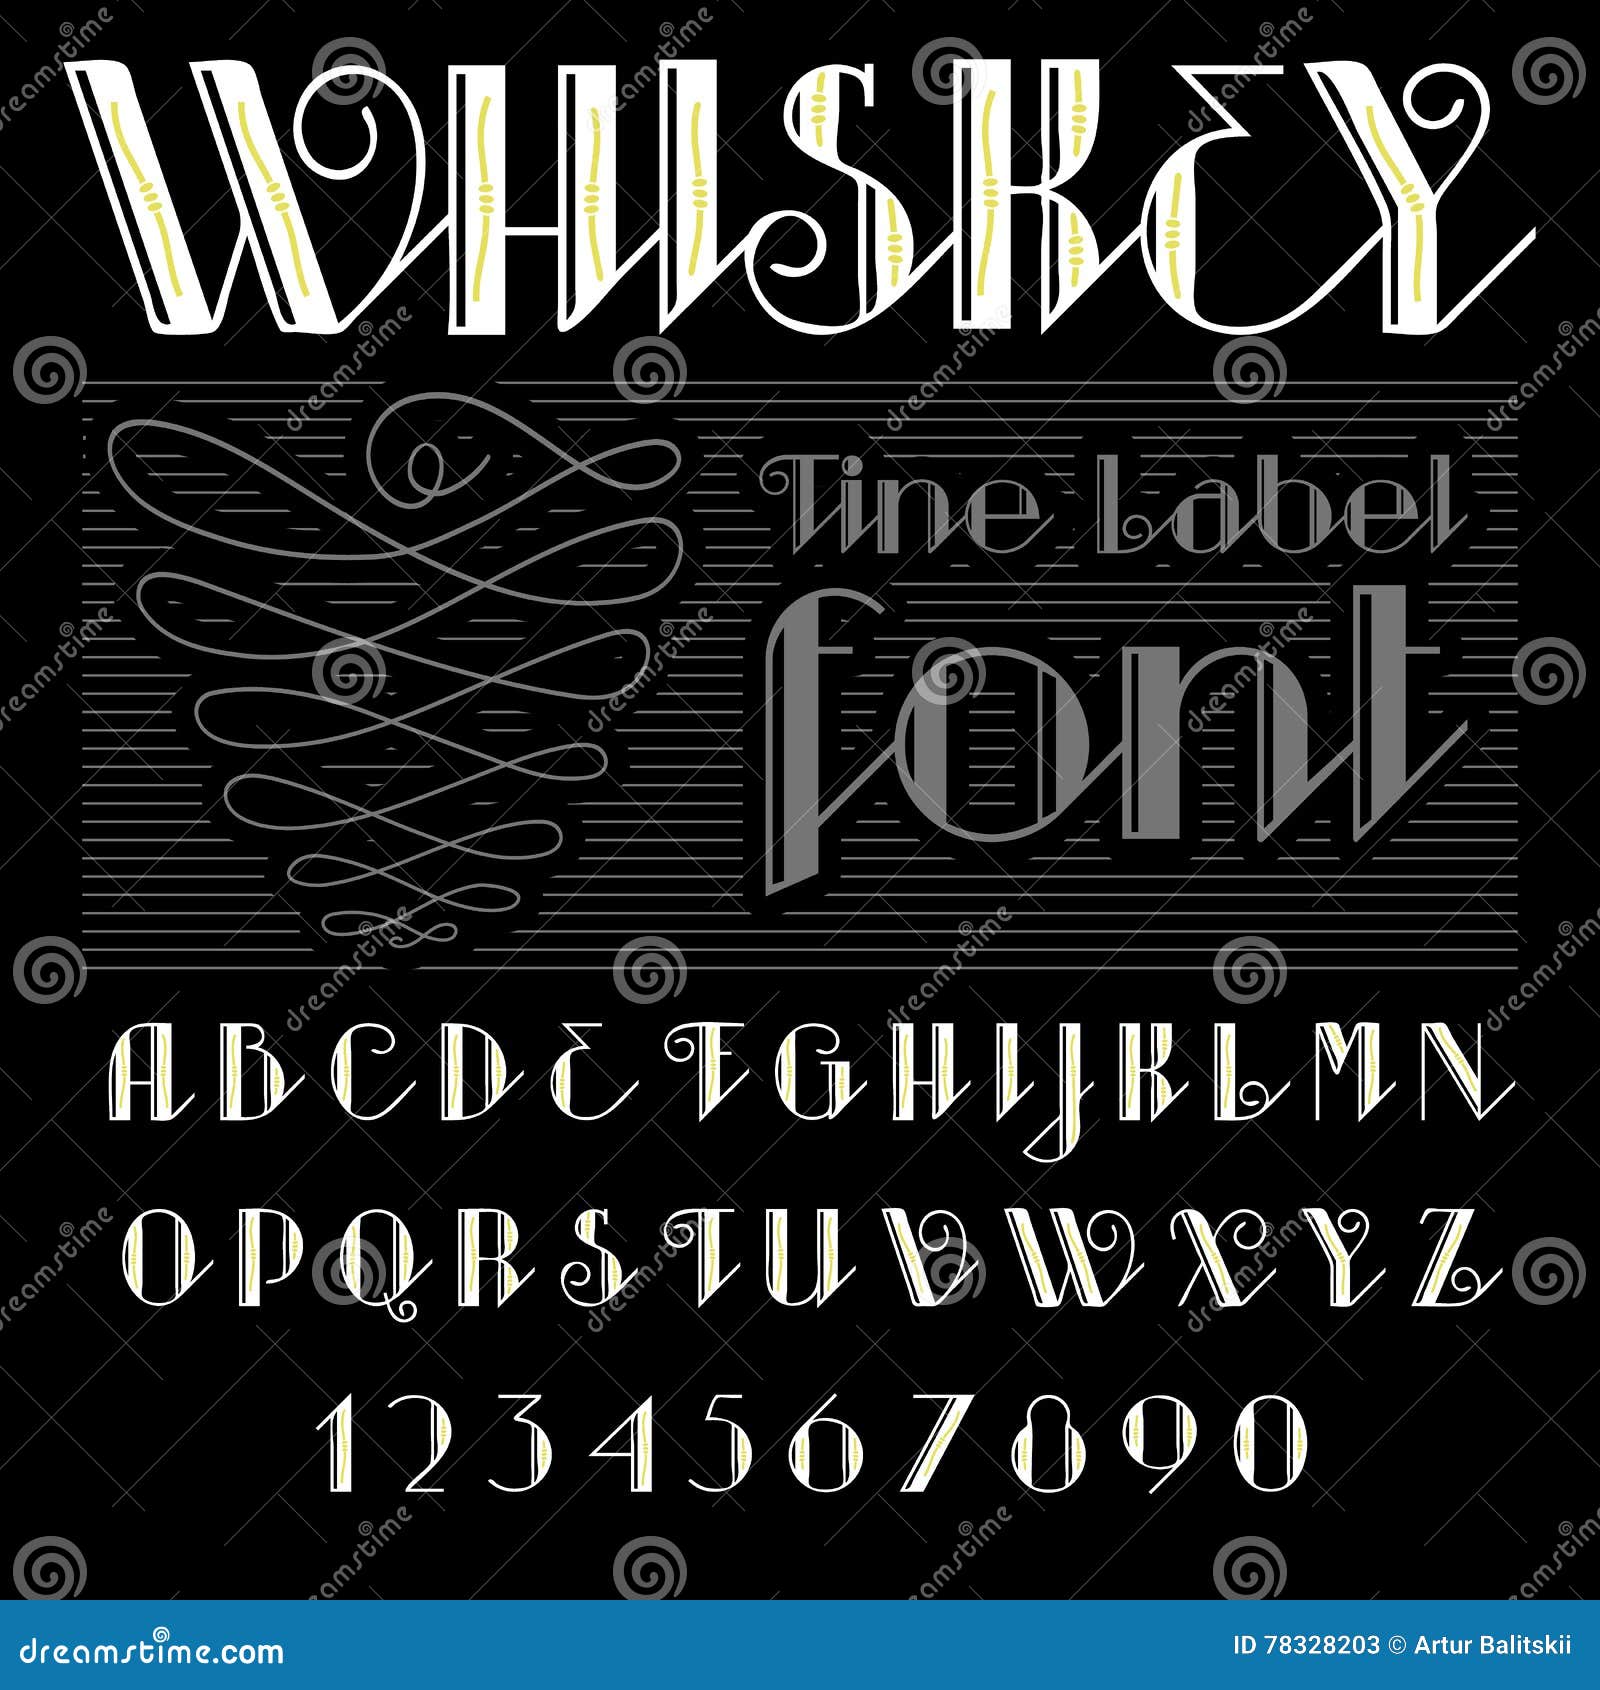 Whiskey Label Font and Sample Label Design. Vintage Looking Typeface in ...